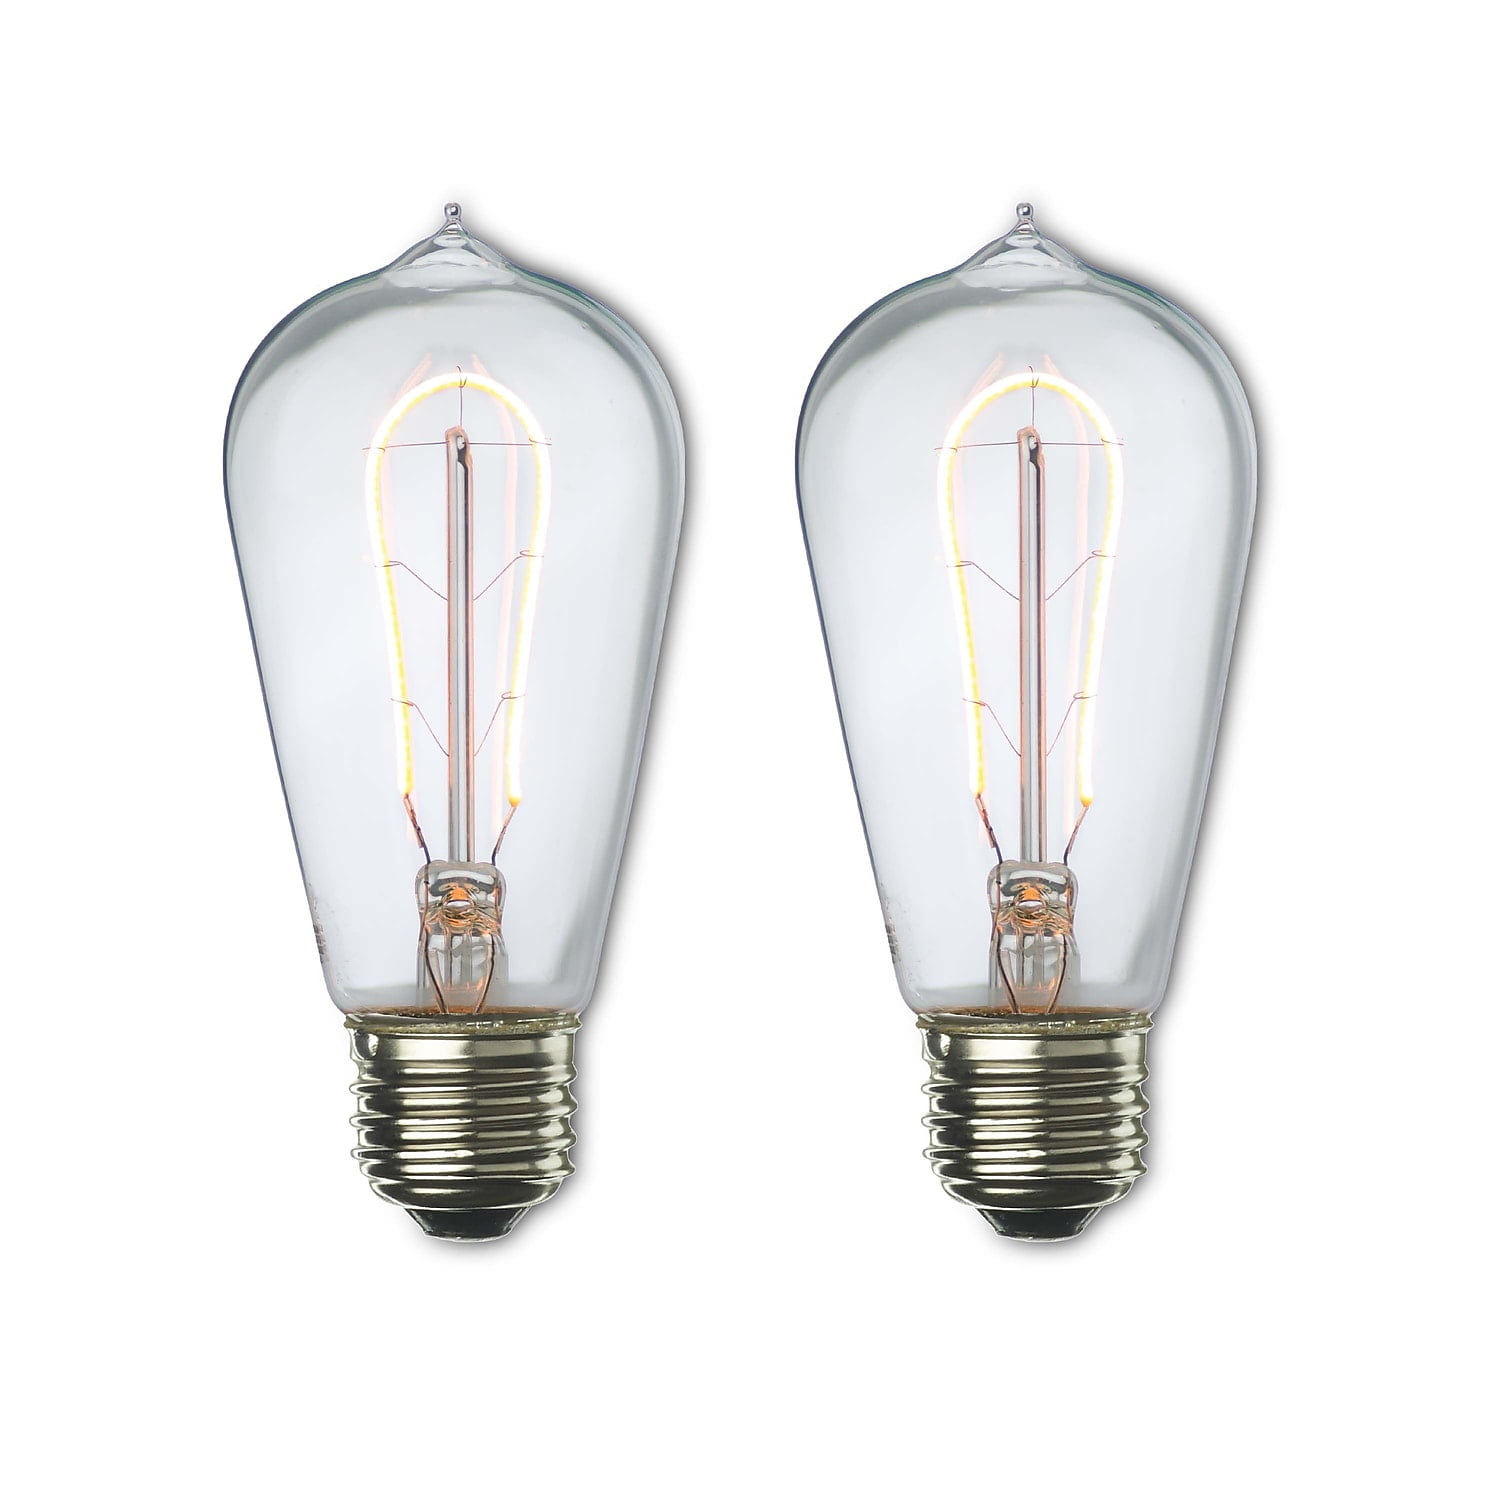 Picture of Bulbrite Pack of (2) 4 Watt Dimmable Antique Glass Finish ST18 LED Light Bulbs with Nostalgic Curved Filament and Medium (E26) Base  2200K Amber Light  190 Lumens